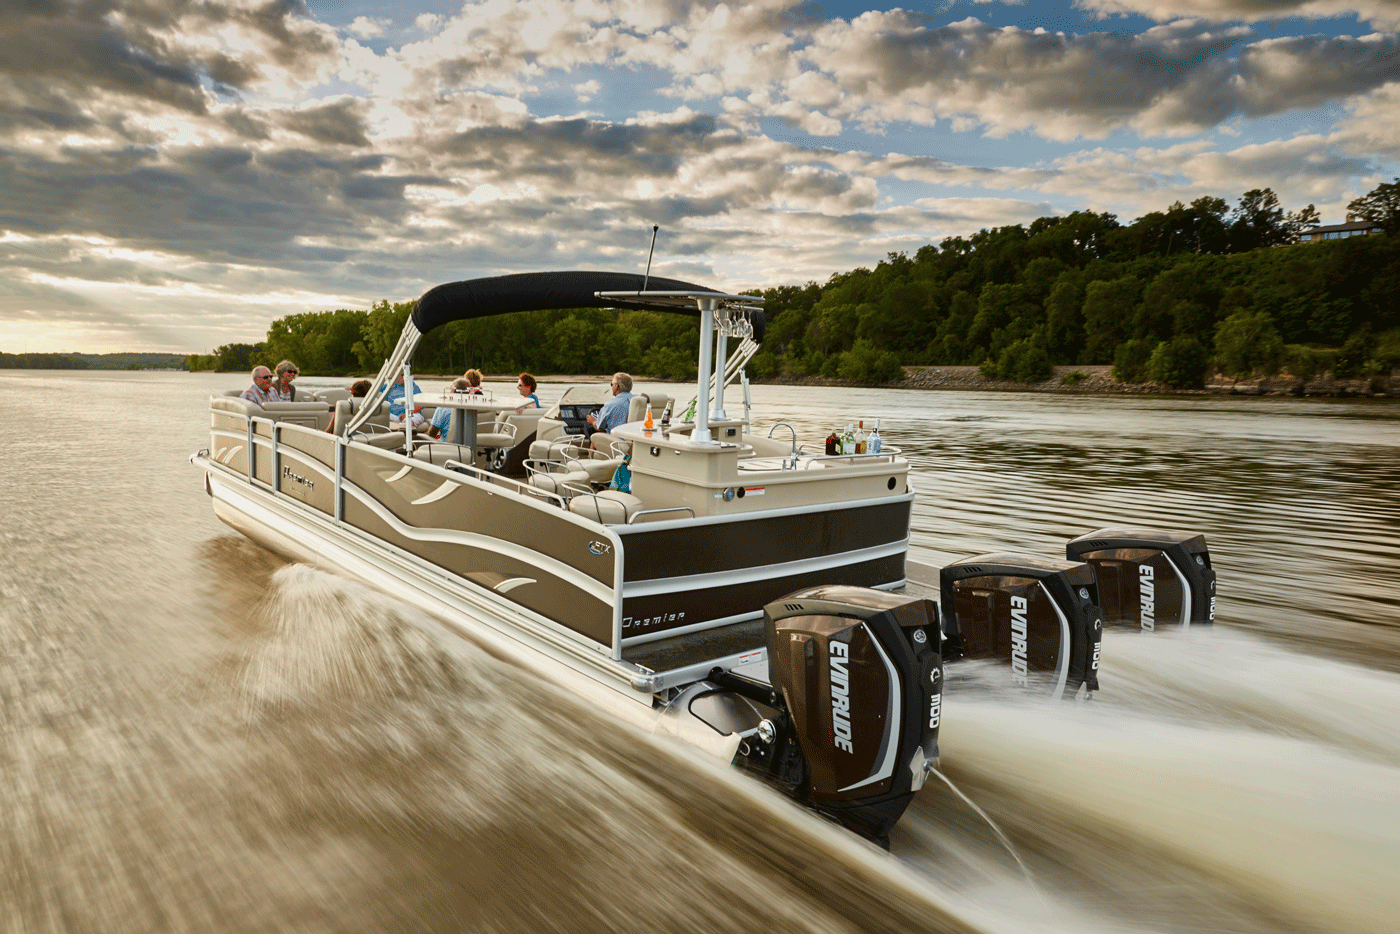 When was the last time you saw a pontoon with triple outboards on the stern? "Never," is the correct answer.